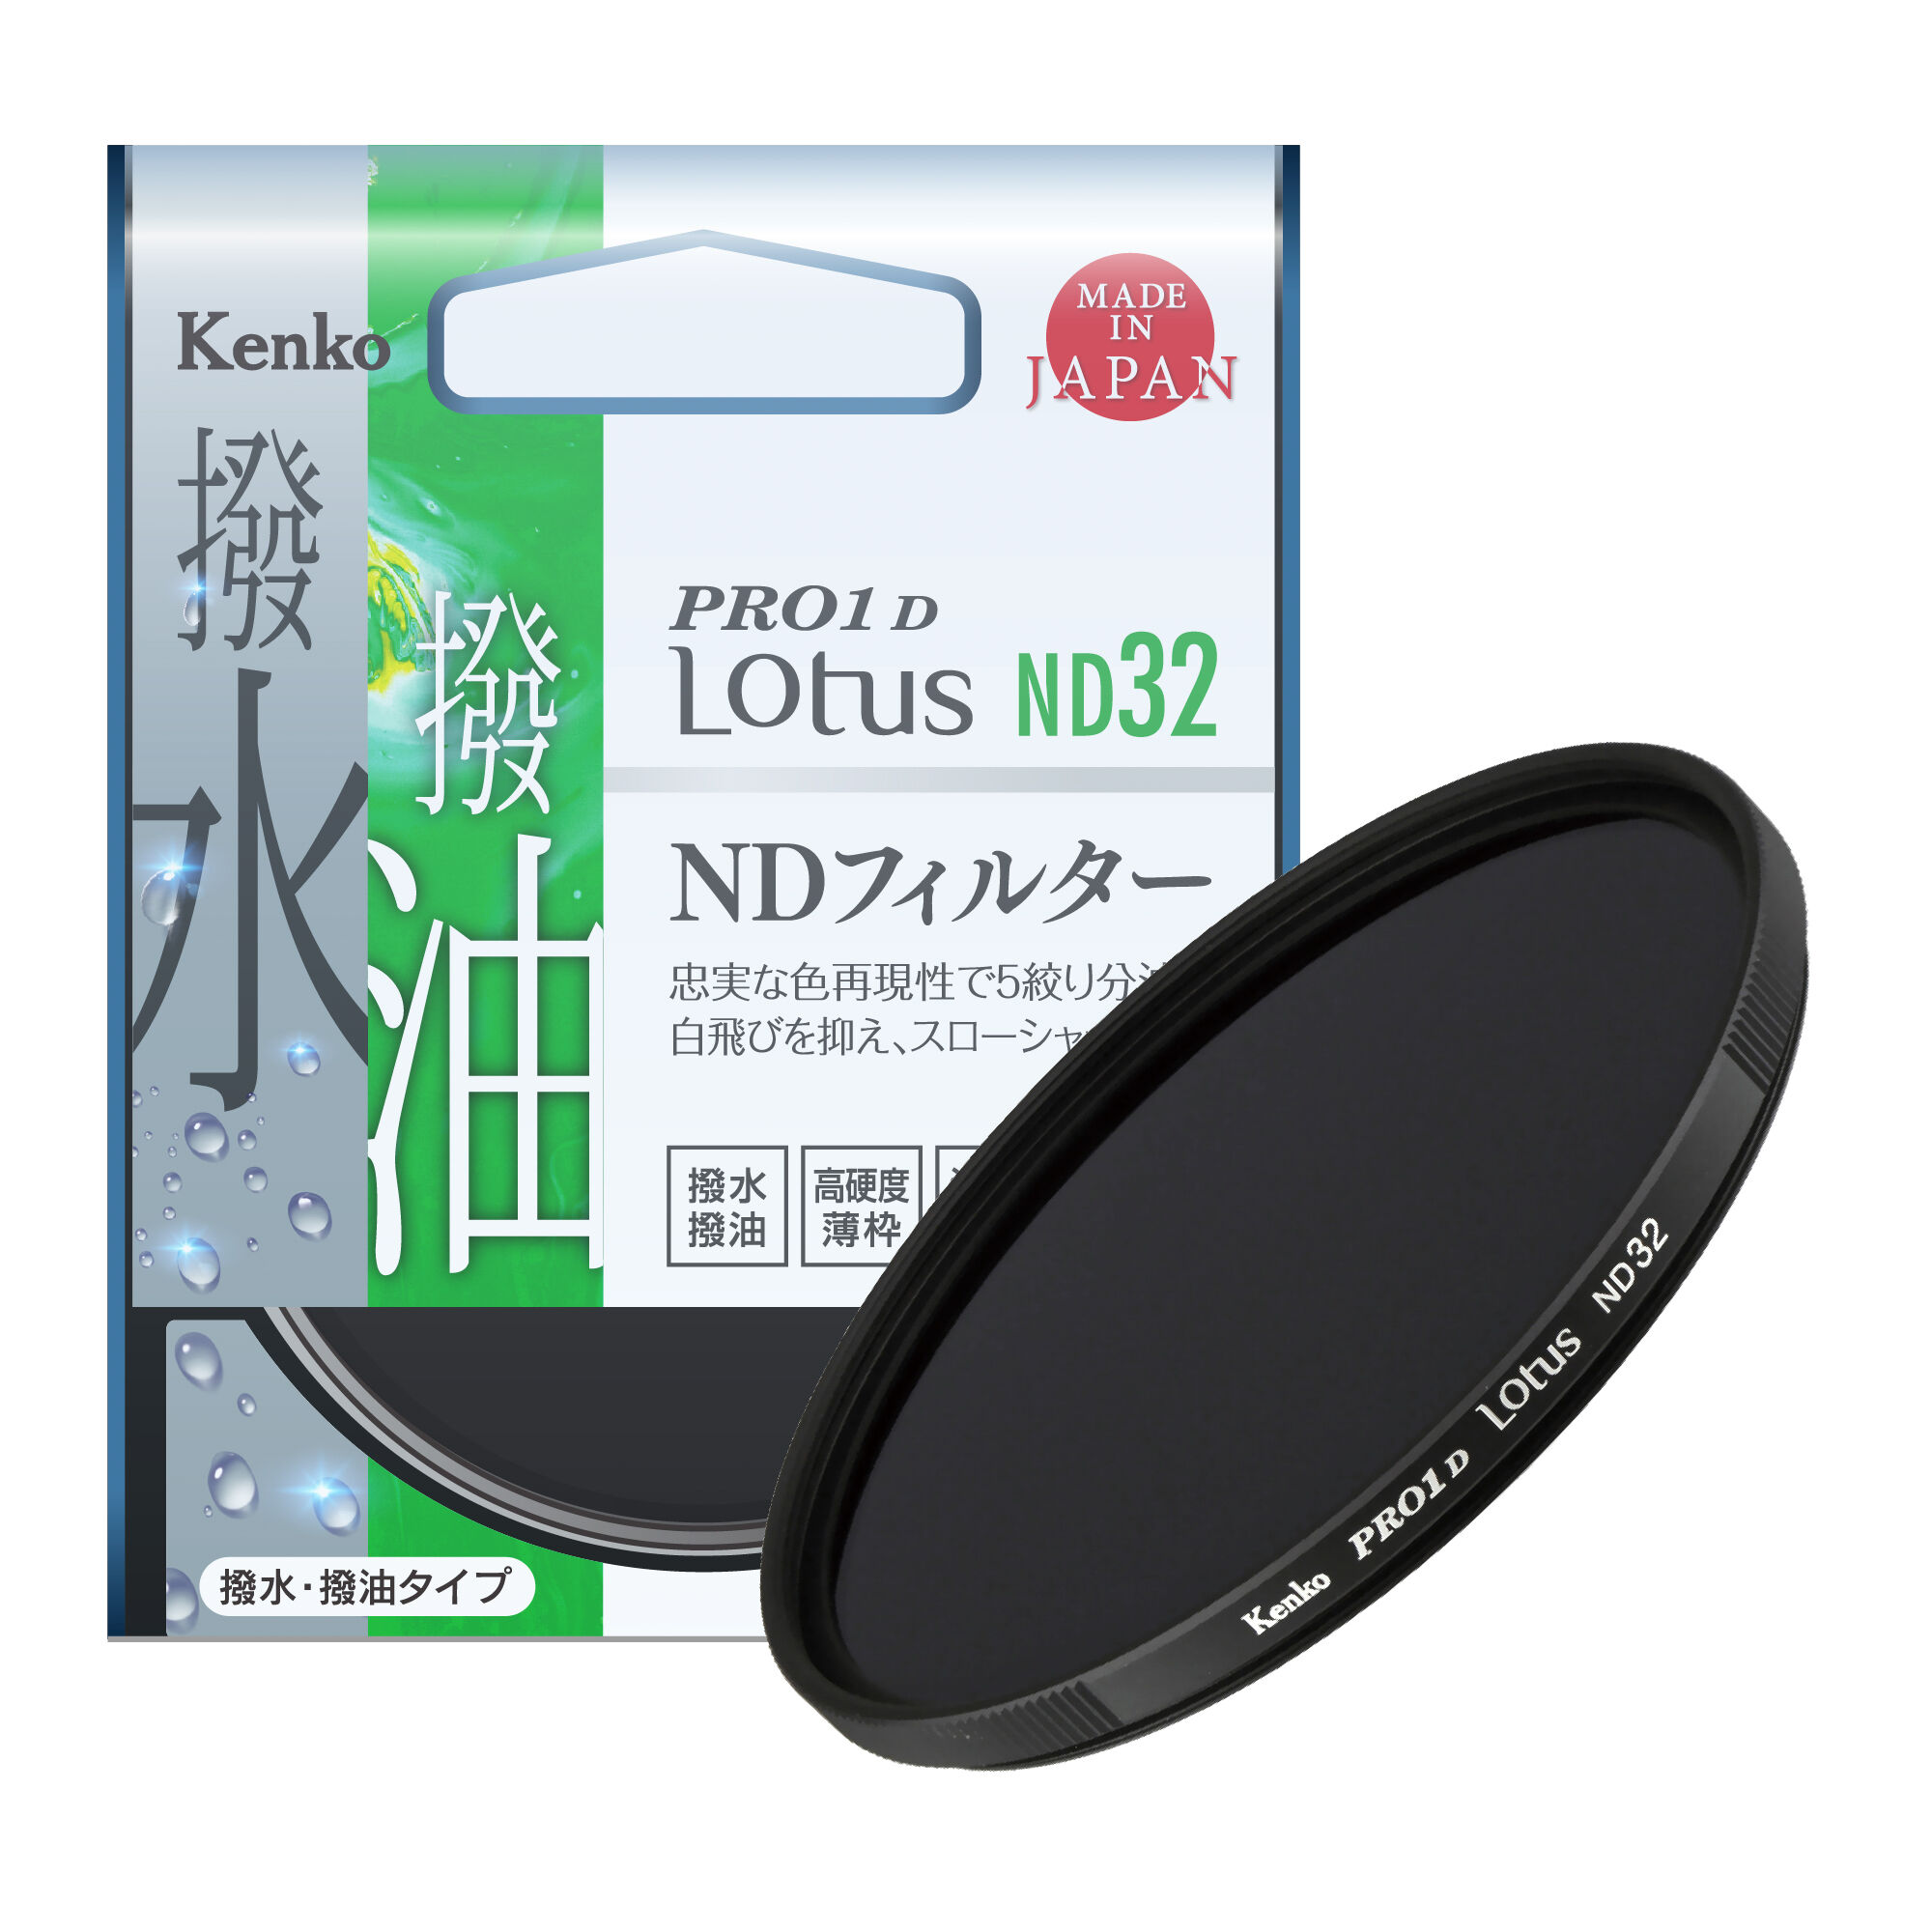 PRO1D Lotus ND32 | ケンコー・トキナー